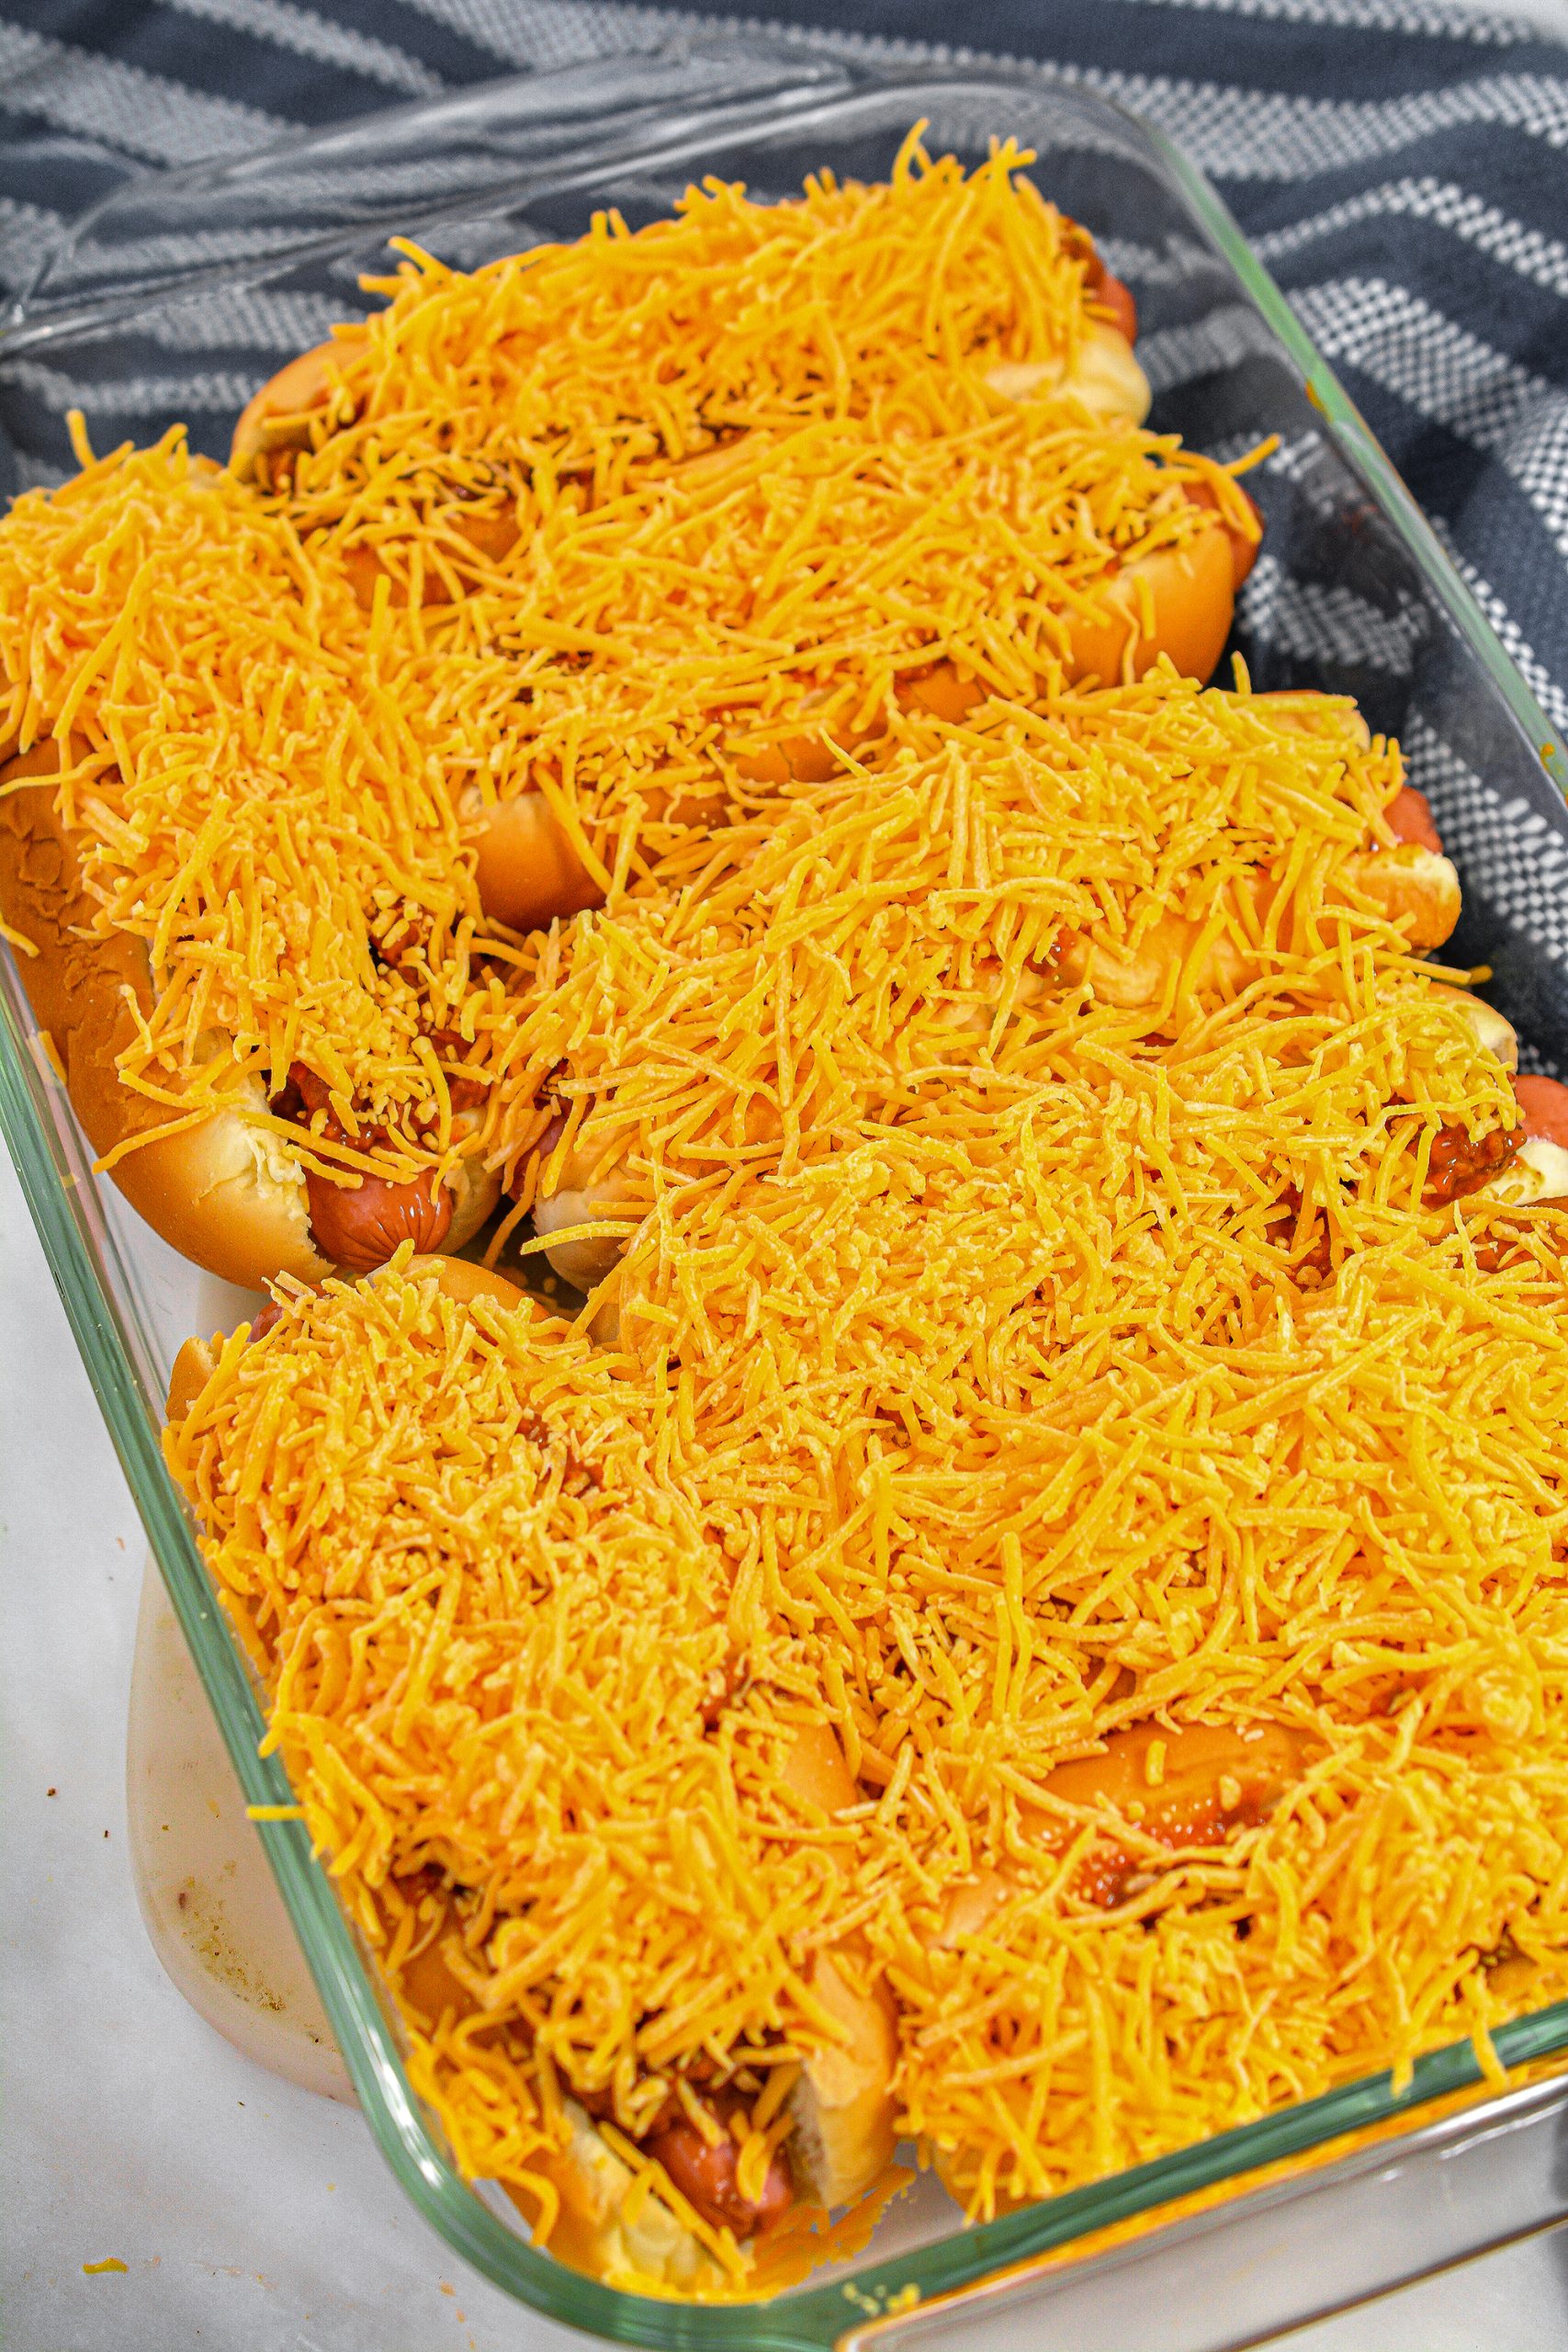 Pile the cheese on top of the hot dogs.